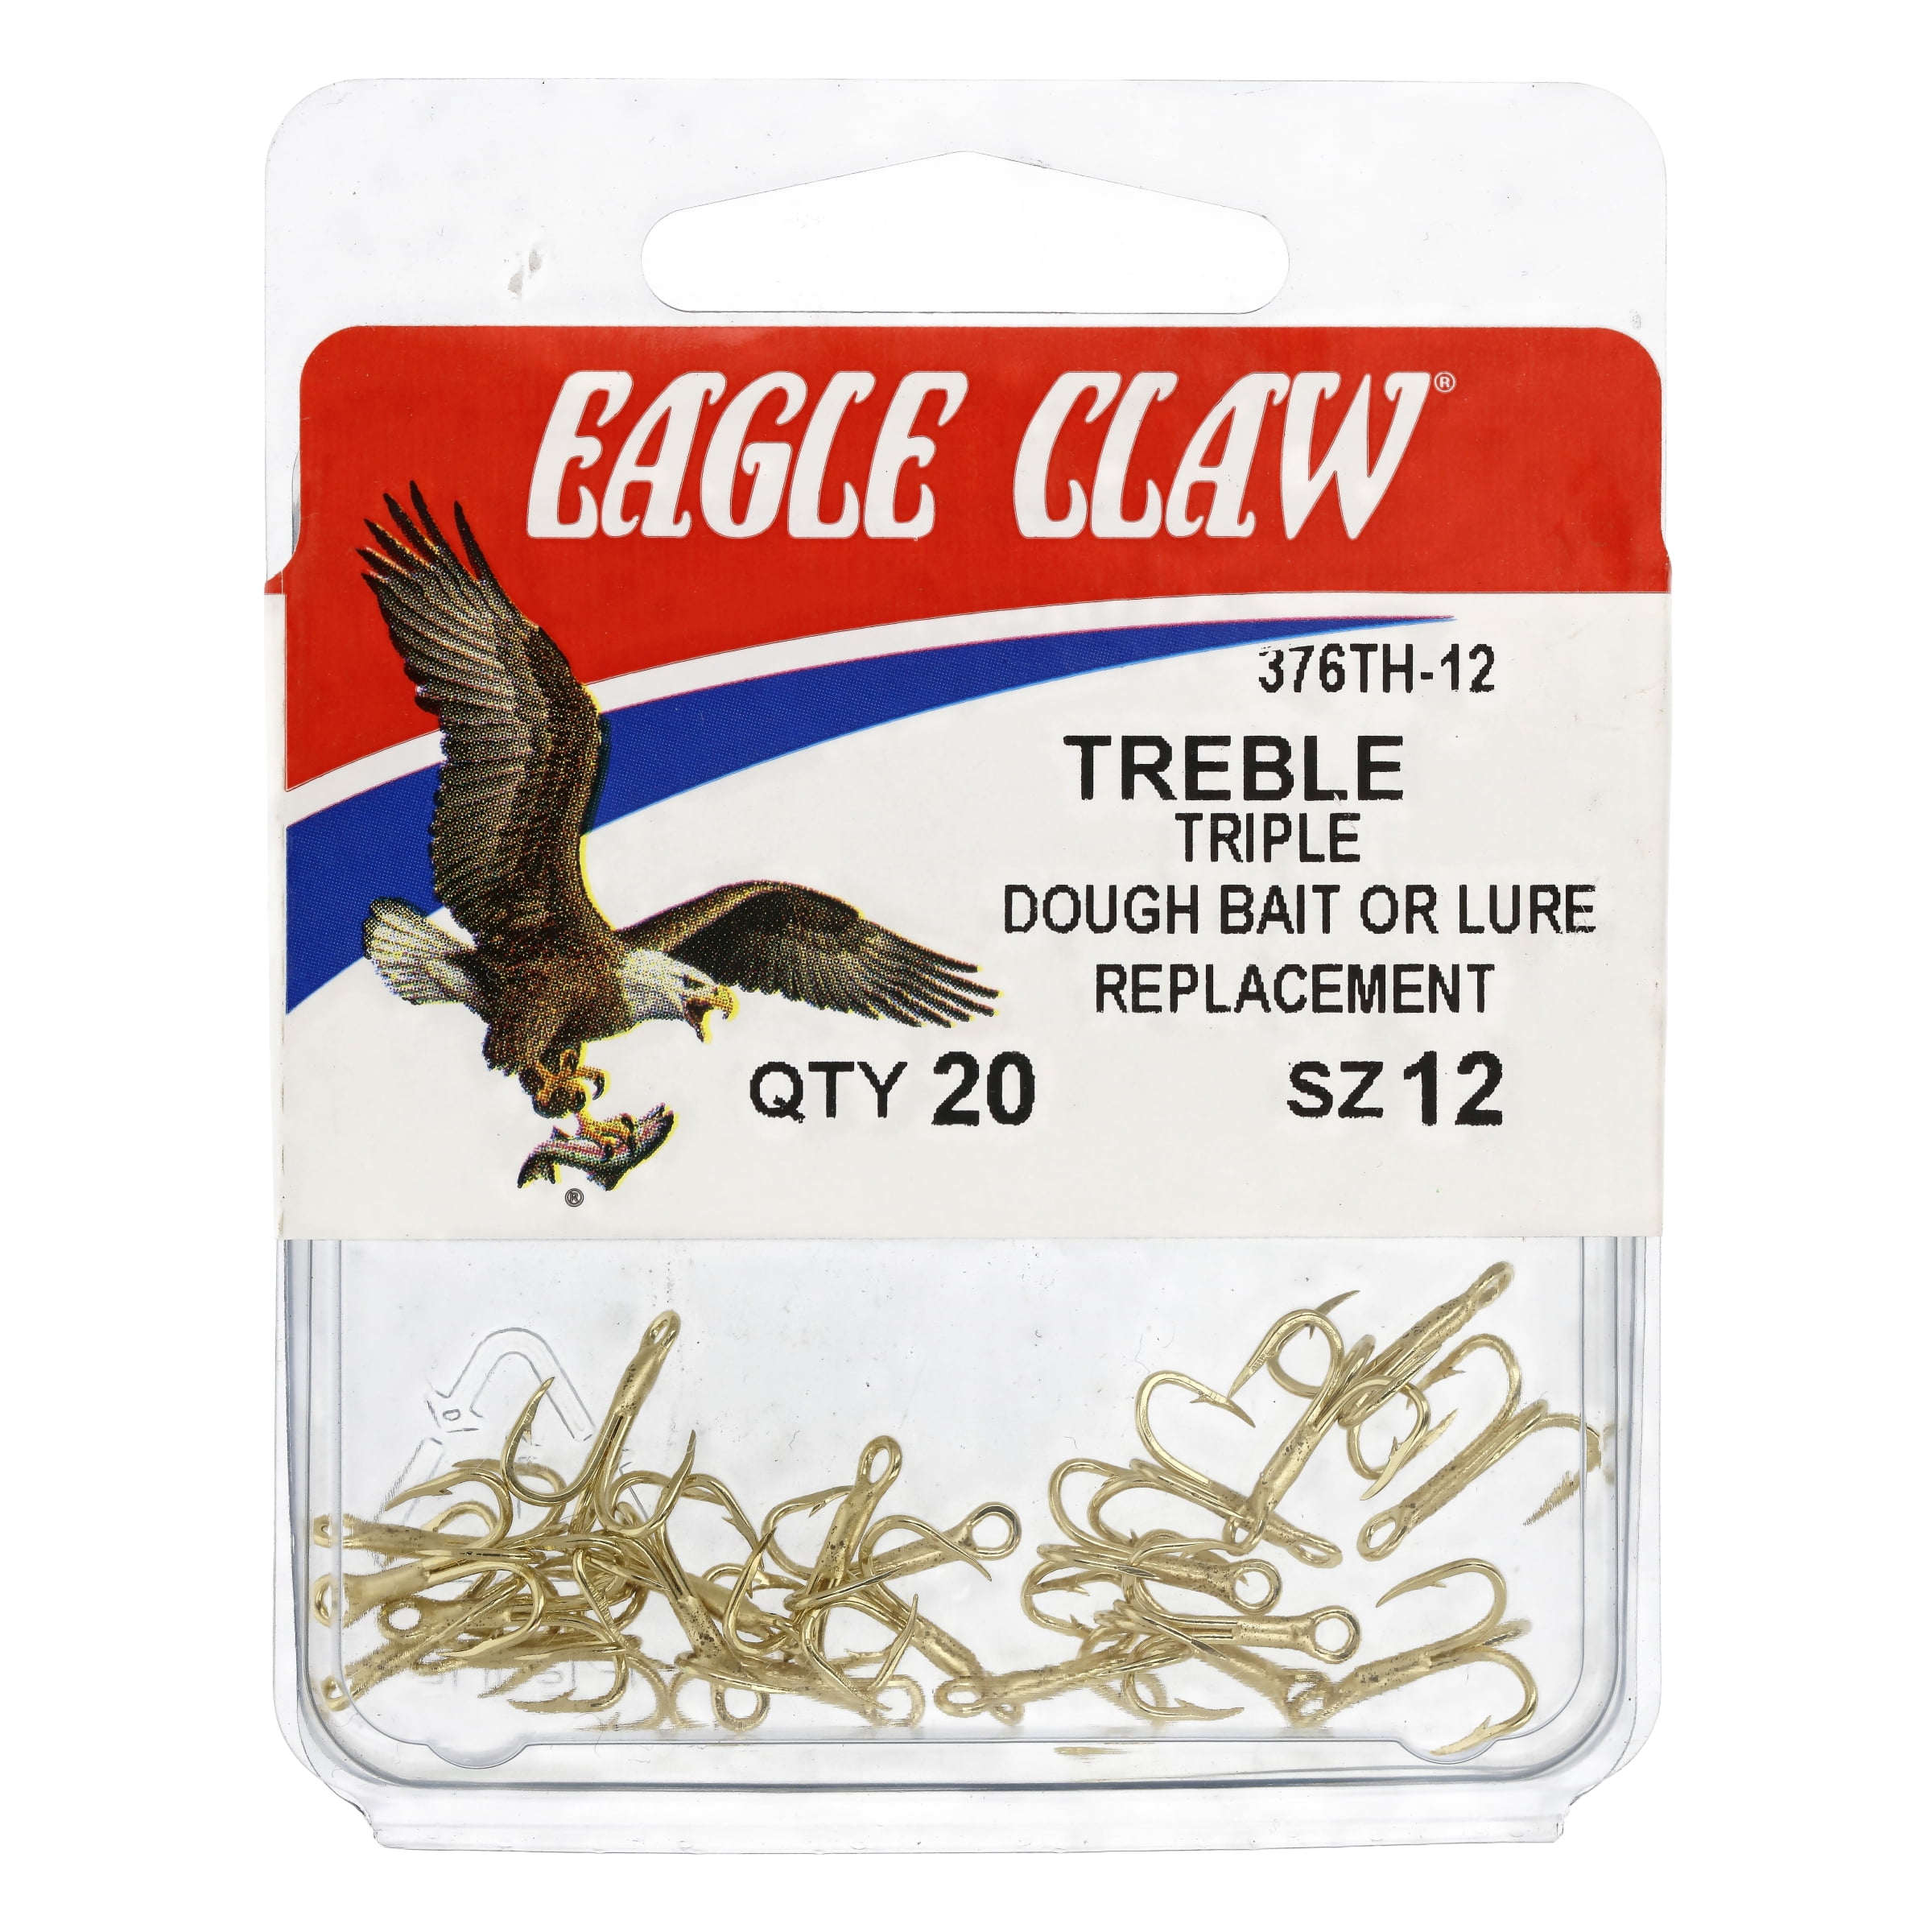 EAGLE CLAW 376 Gold 2x Treble Hook - Bass, Trout, & Walleye Terminal Tackle  $6.98 - PicClick